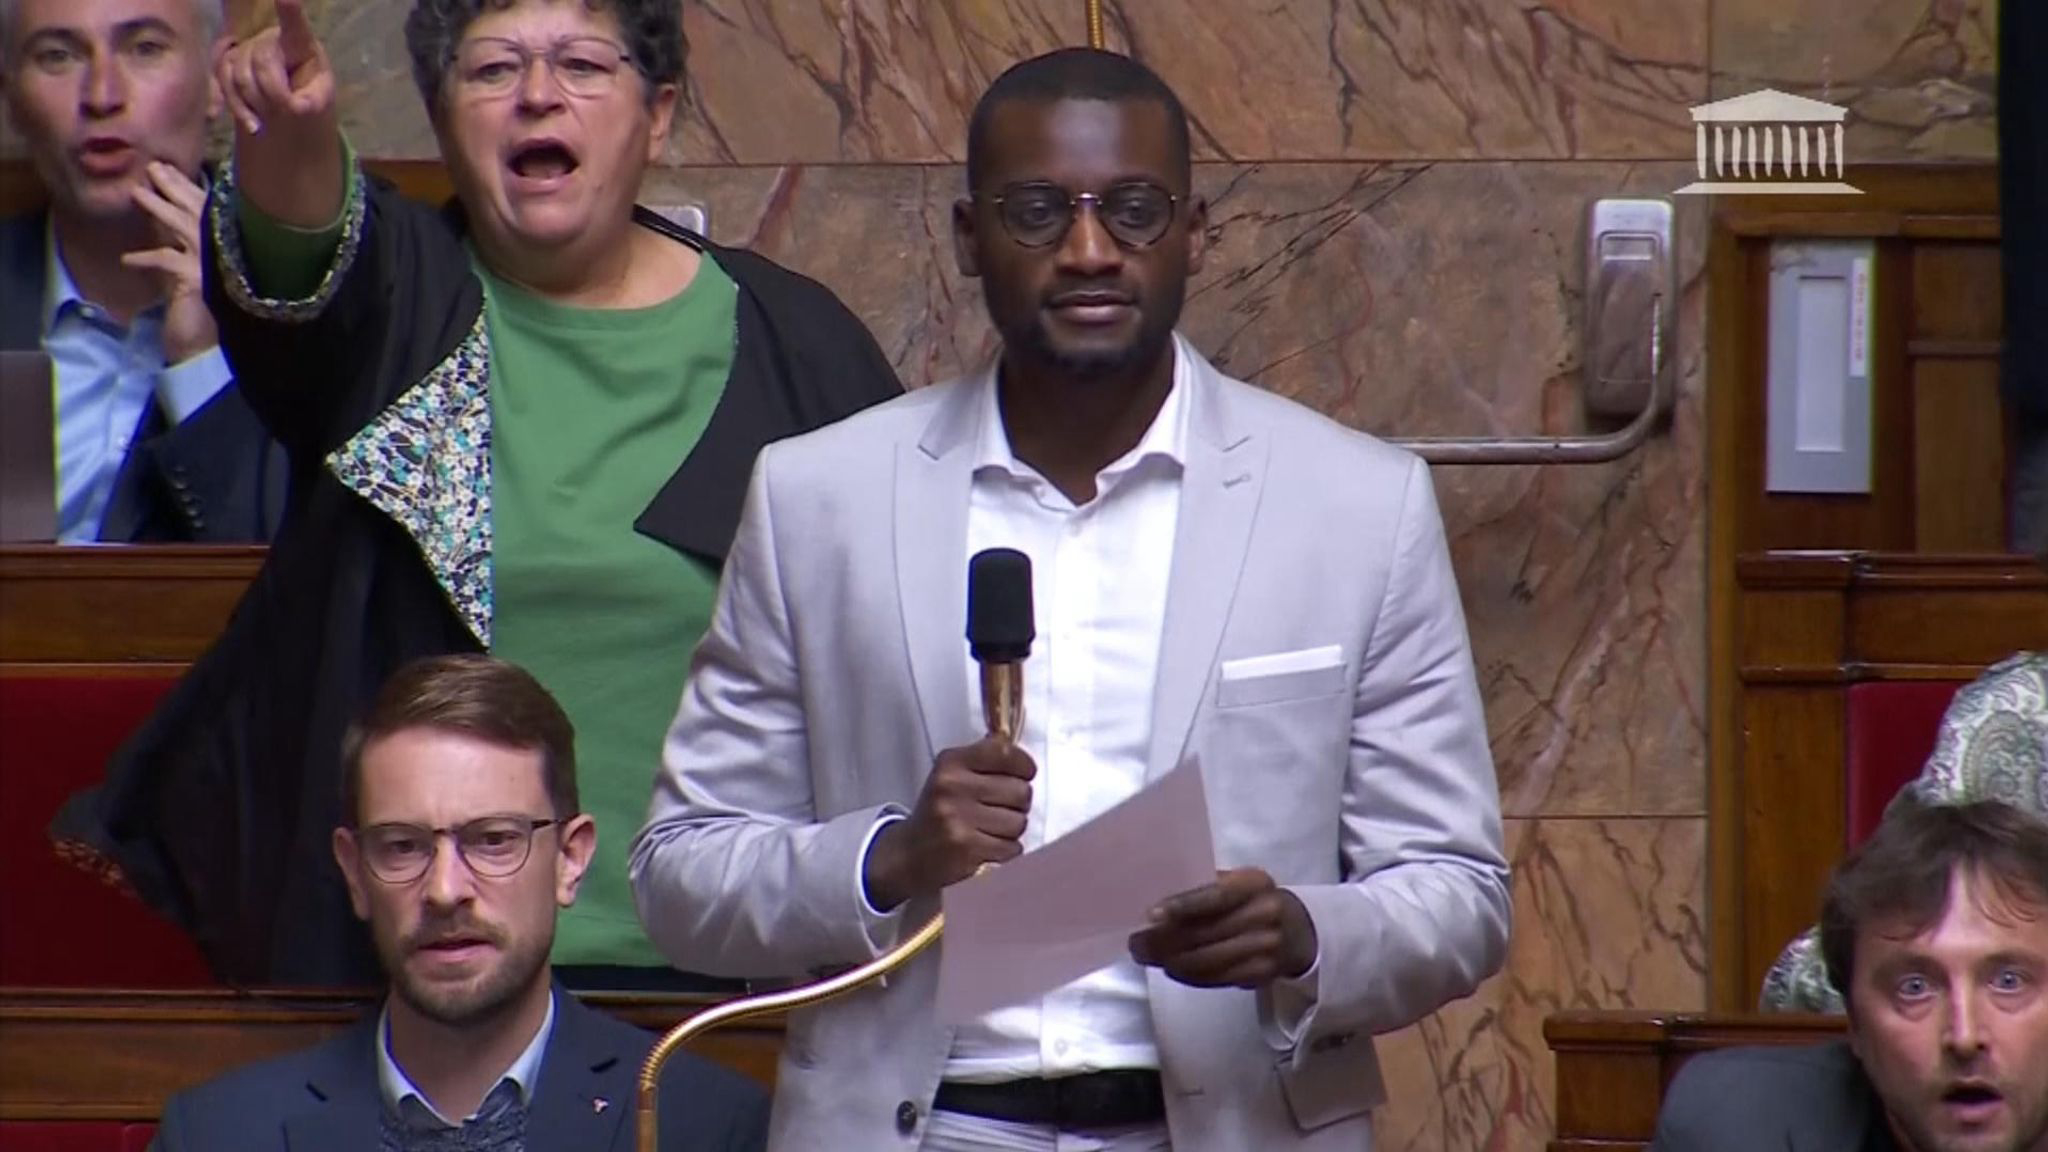 You are currently viewing Racist Far-right MP Shouts ‘Go Back to Africa’ at Black Rival in French Parliament | The African Exponent.